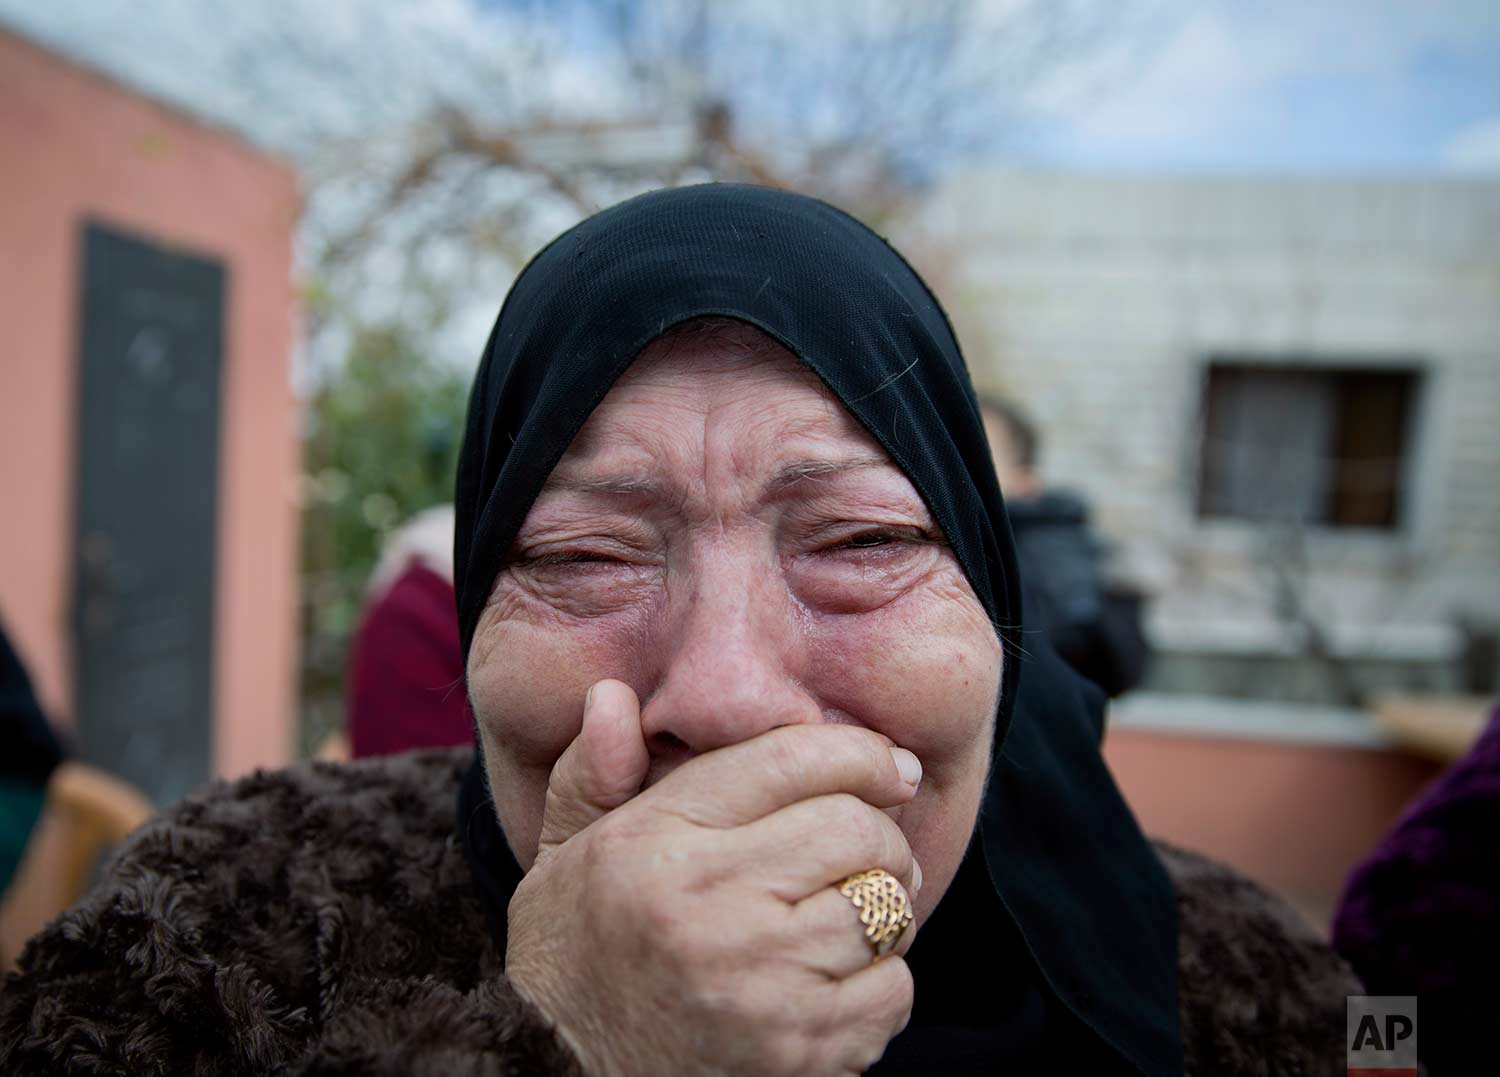  A mourner cries while taking a farewell look at the body of Musab Tamemi, 17, who was killed in clashes with the Israeli army the previous day, during his funeral in the West Bank village of Deir Nizam, near Ramallah, Thursday, Jan. 4, 2018. Israel'